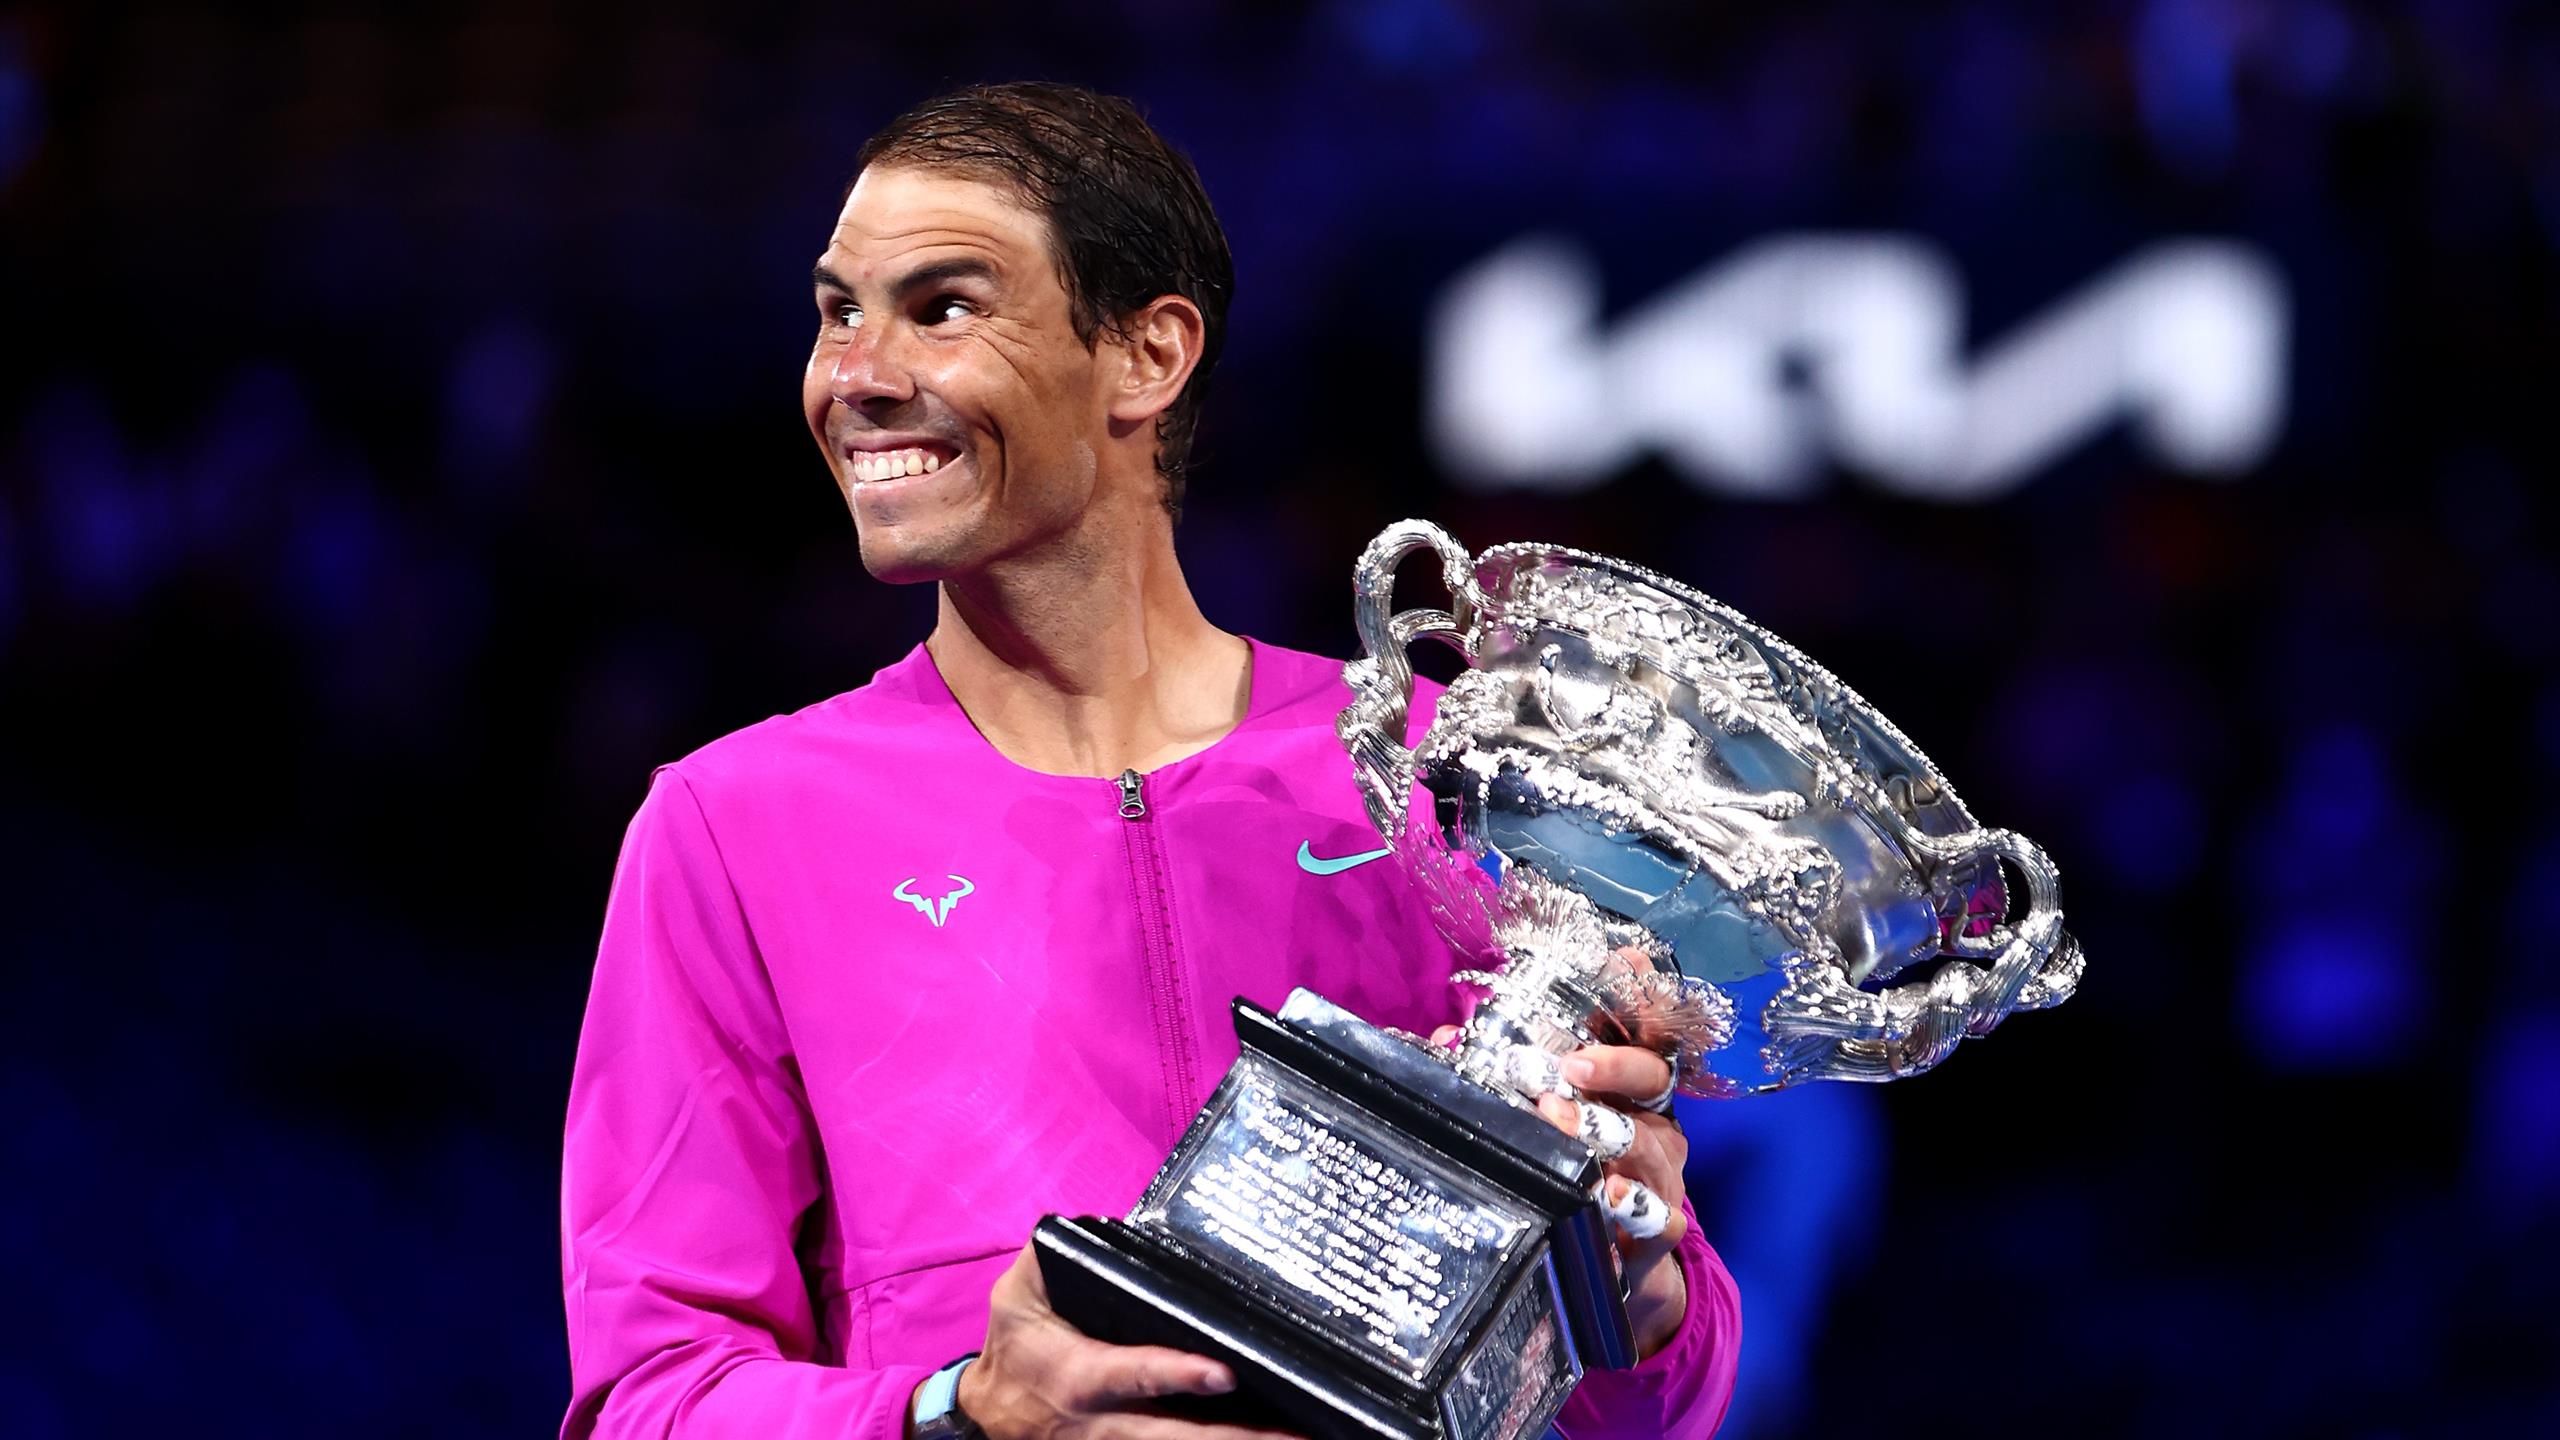 Australian Open 2023 What is the schedule? When is the draw? How to watch? Are Novak Djokovic, Rafael Nadal playing?